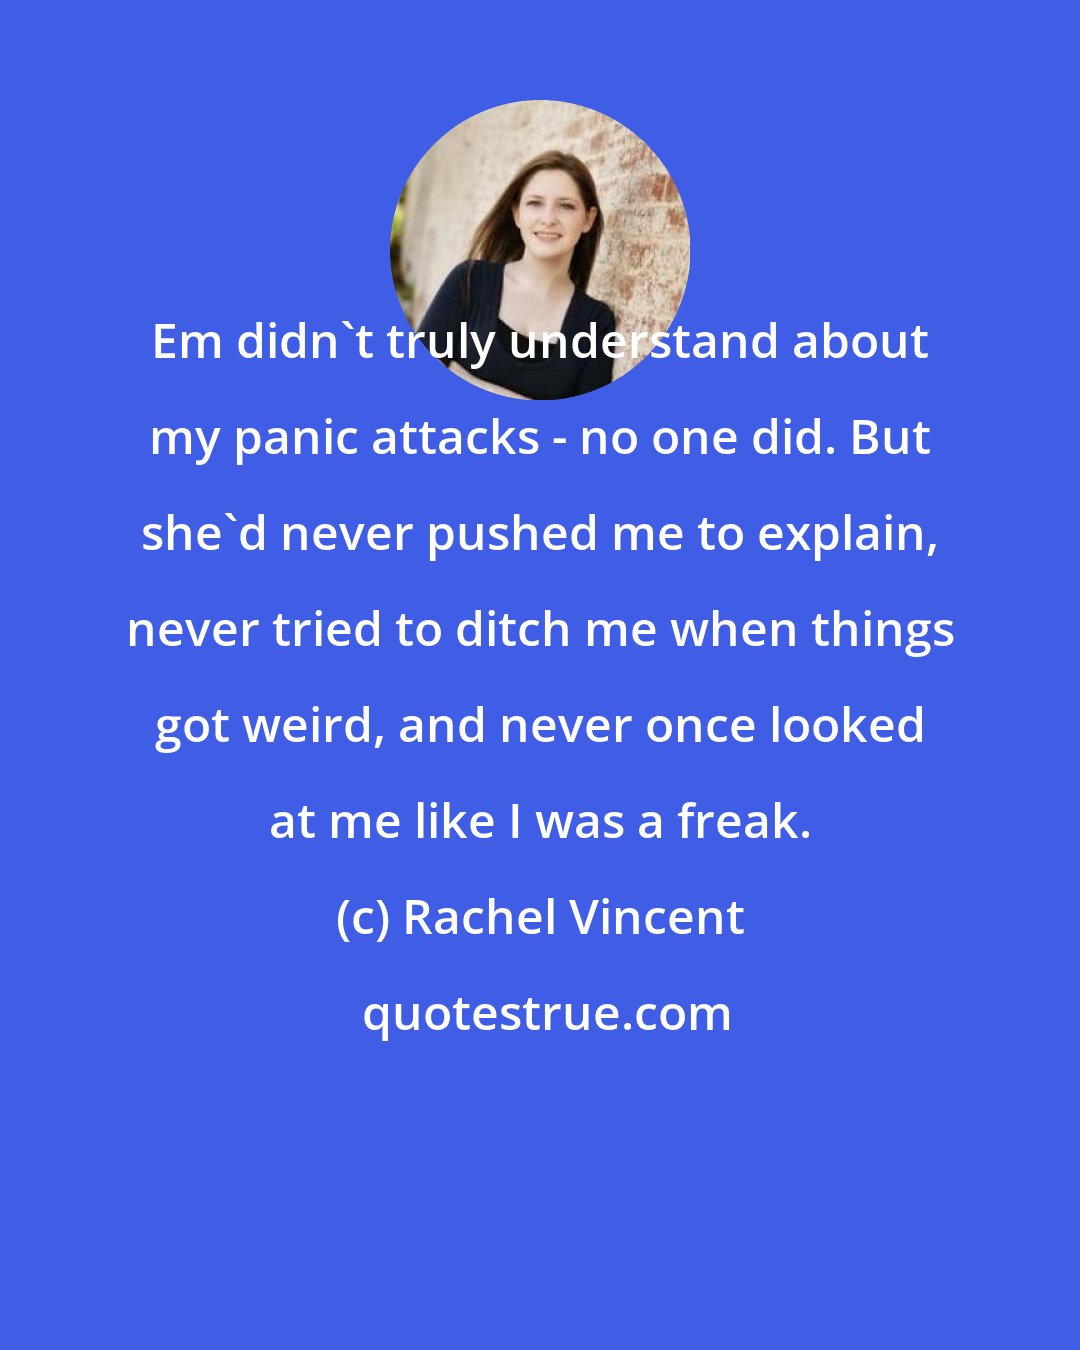 Rachel Vincent: Em didn't truly understand about my panic attacks - no one did. But she'd never pushed me to explain, never tried to ditch me when things got weird, and never once looked at me like I was a freak.